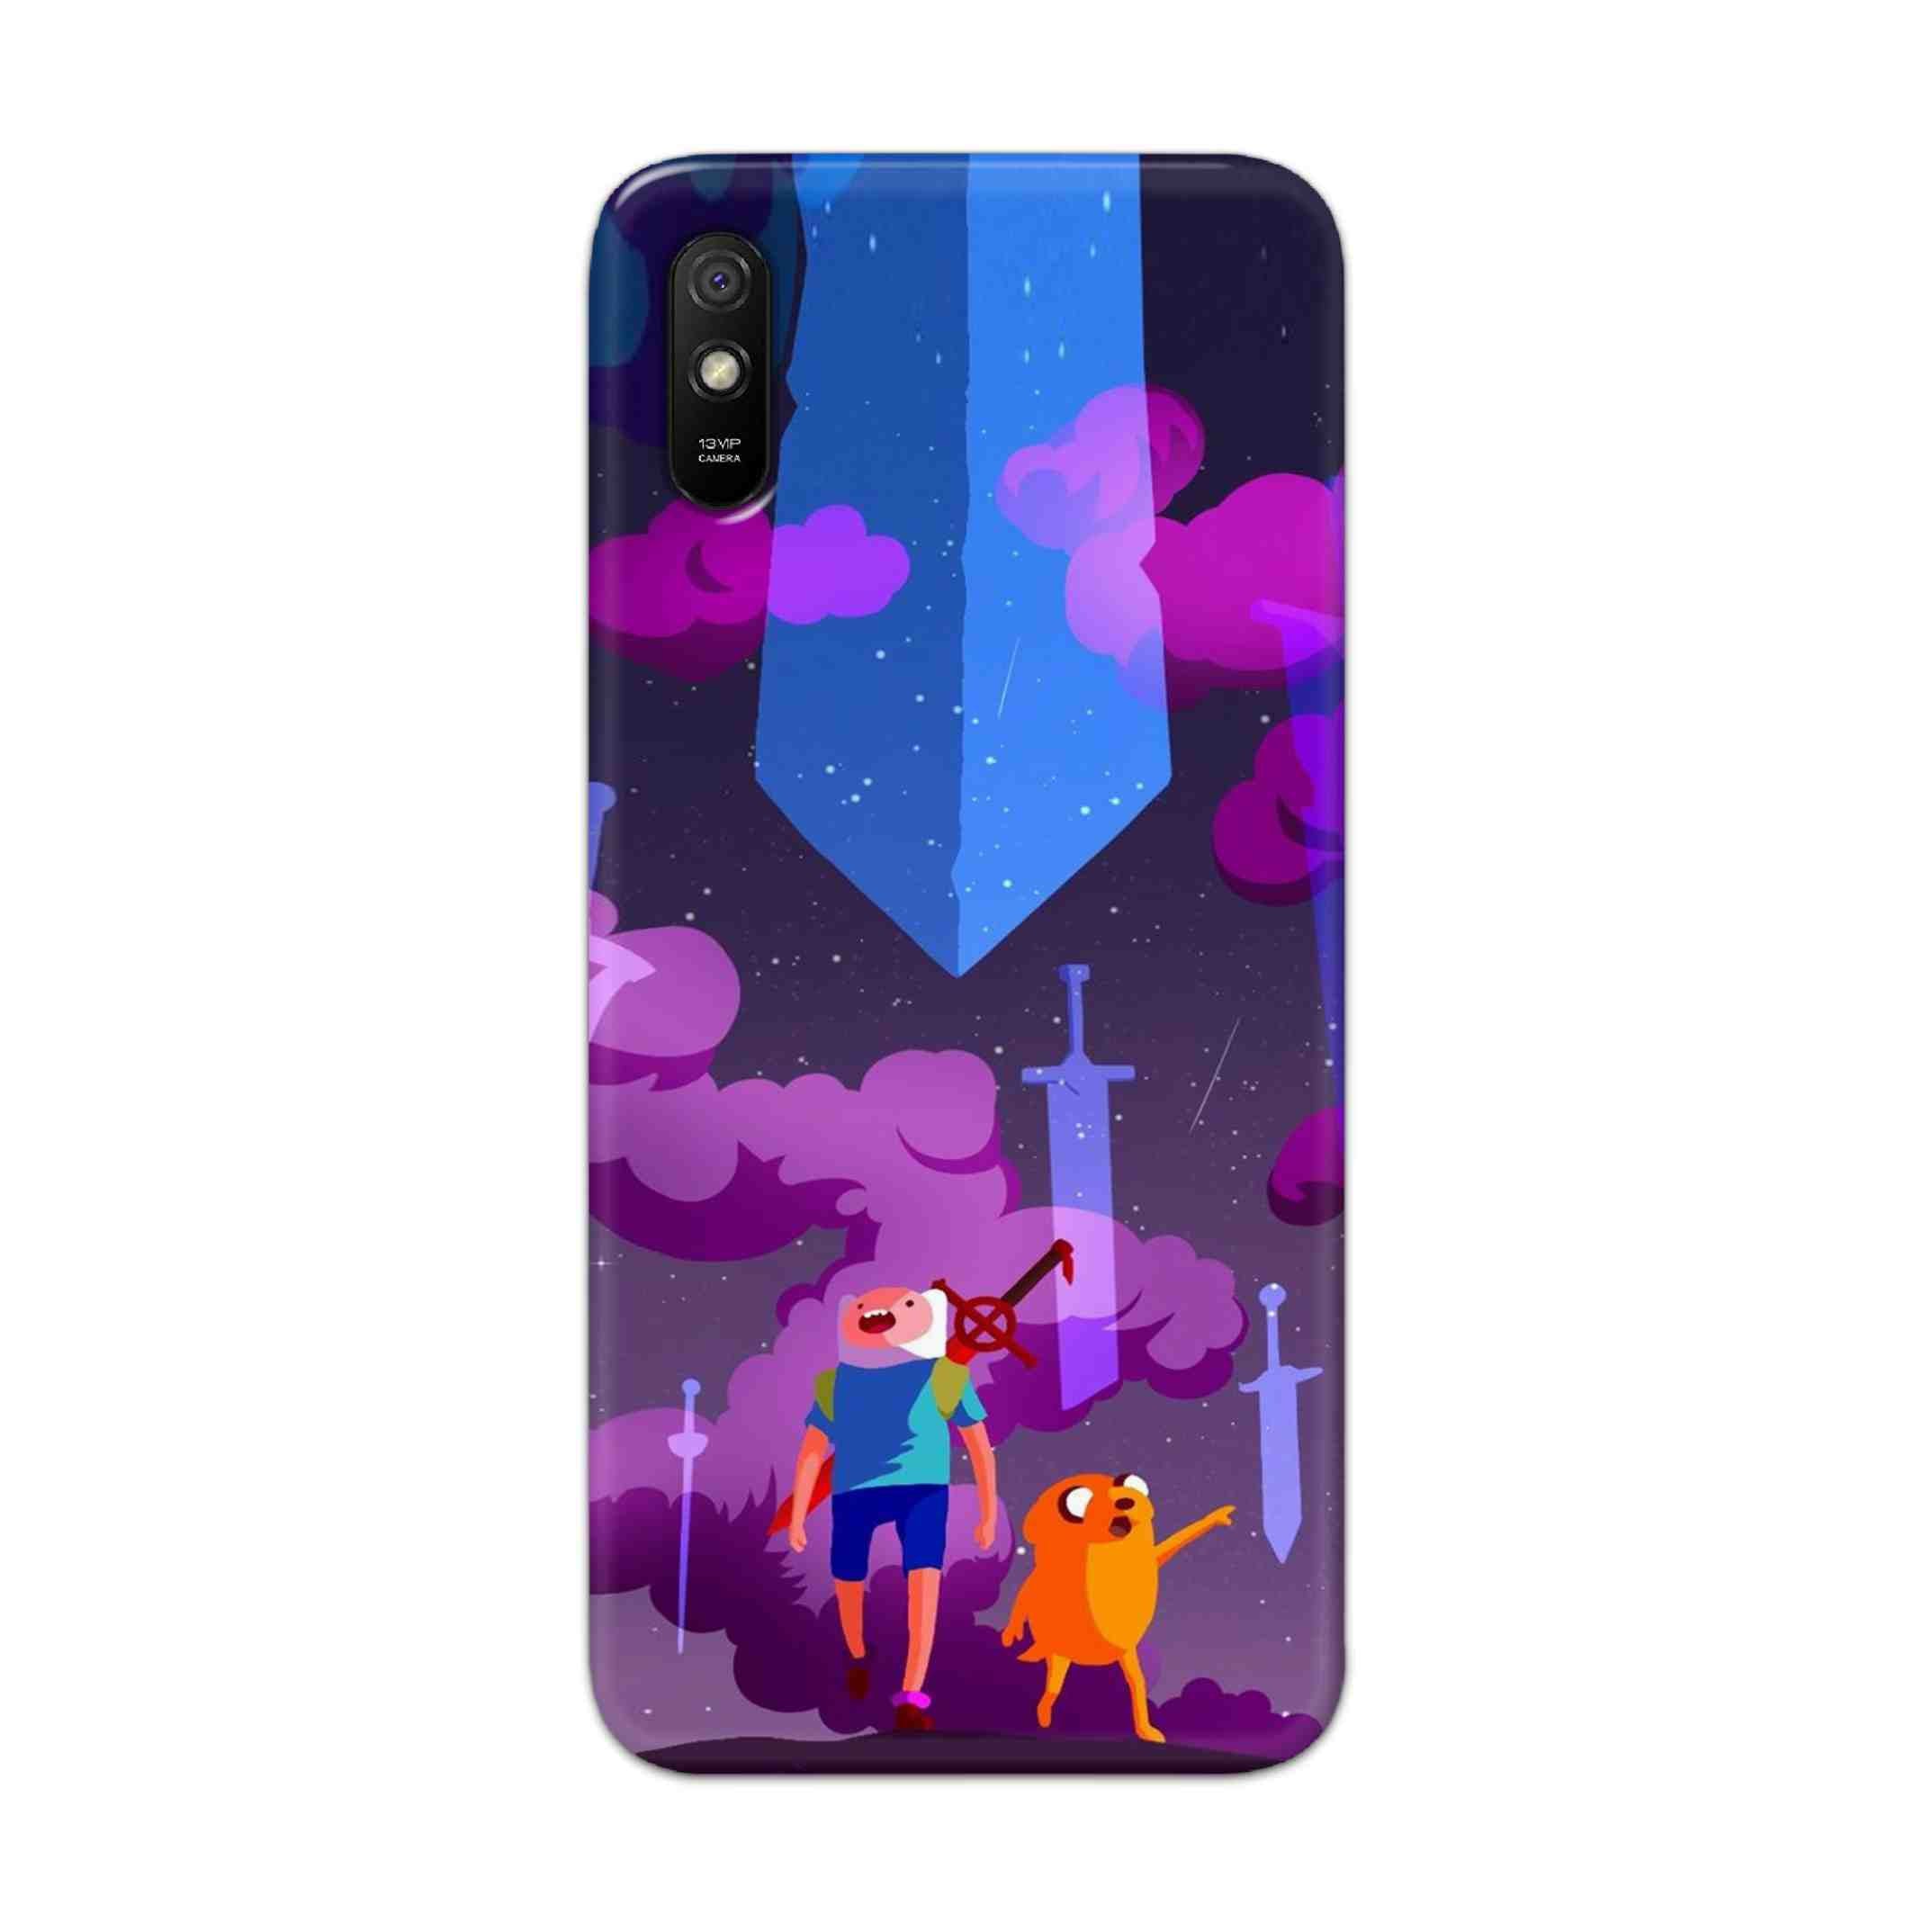 Buy Micky Cartoon Hard Back Mobile Phone Case Cover For Redmi 9A Online